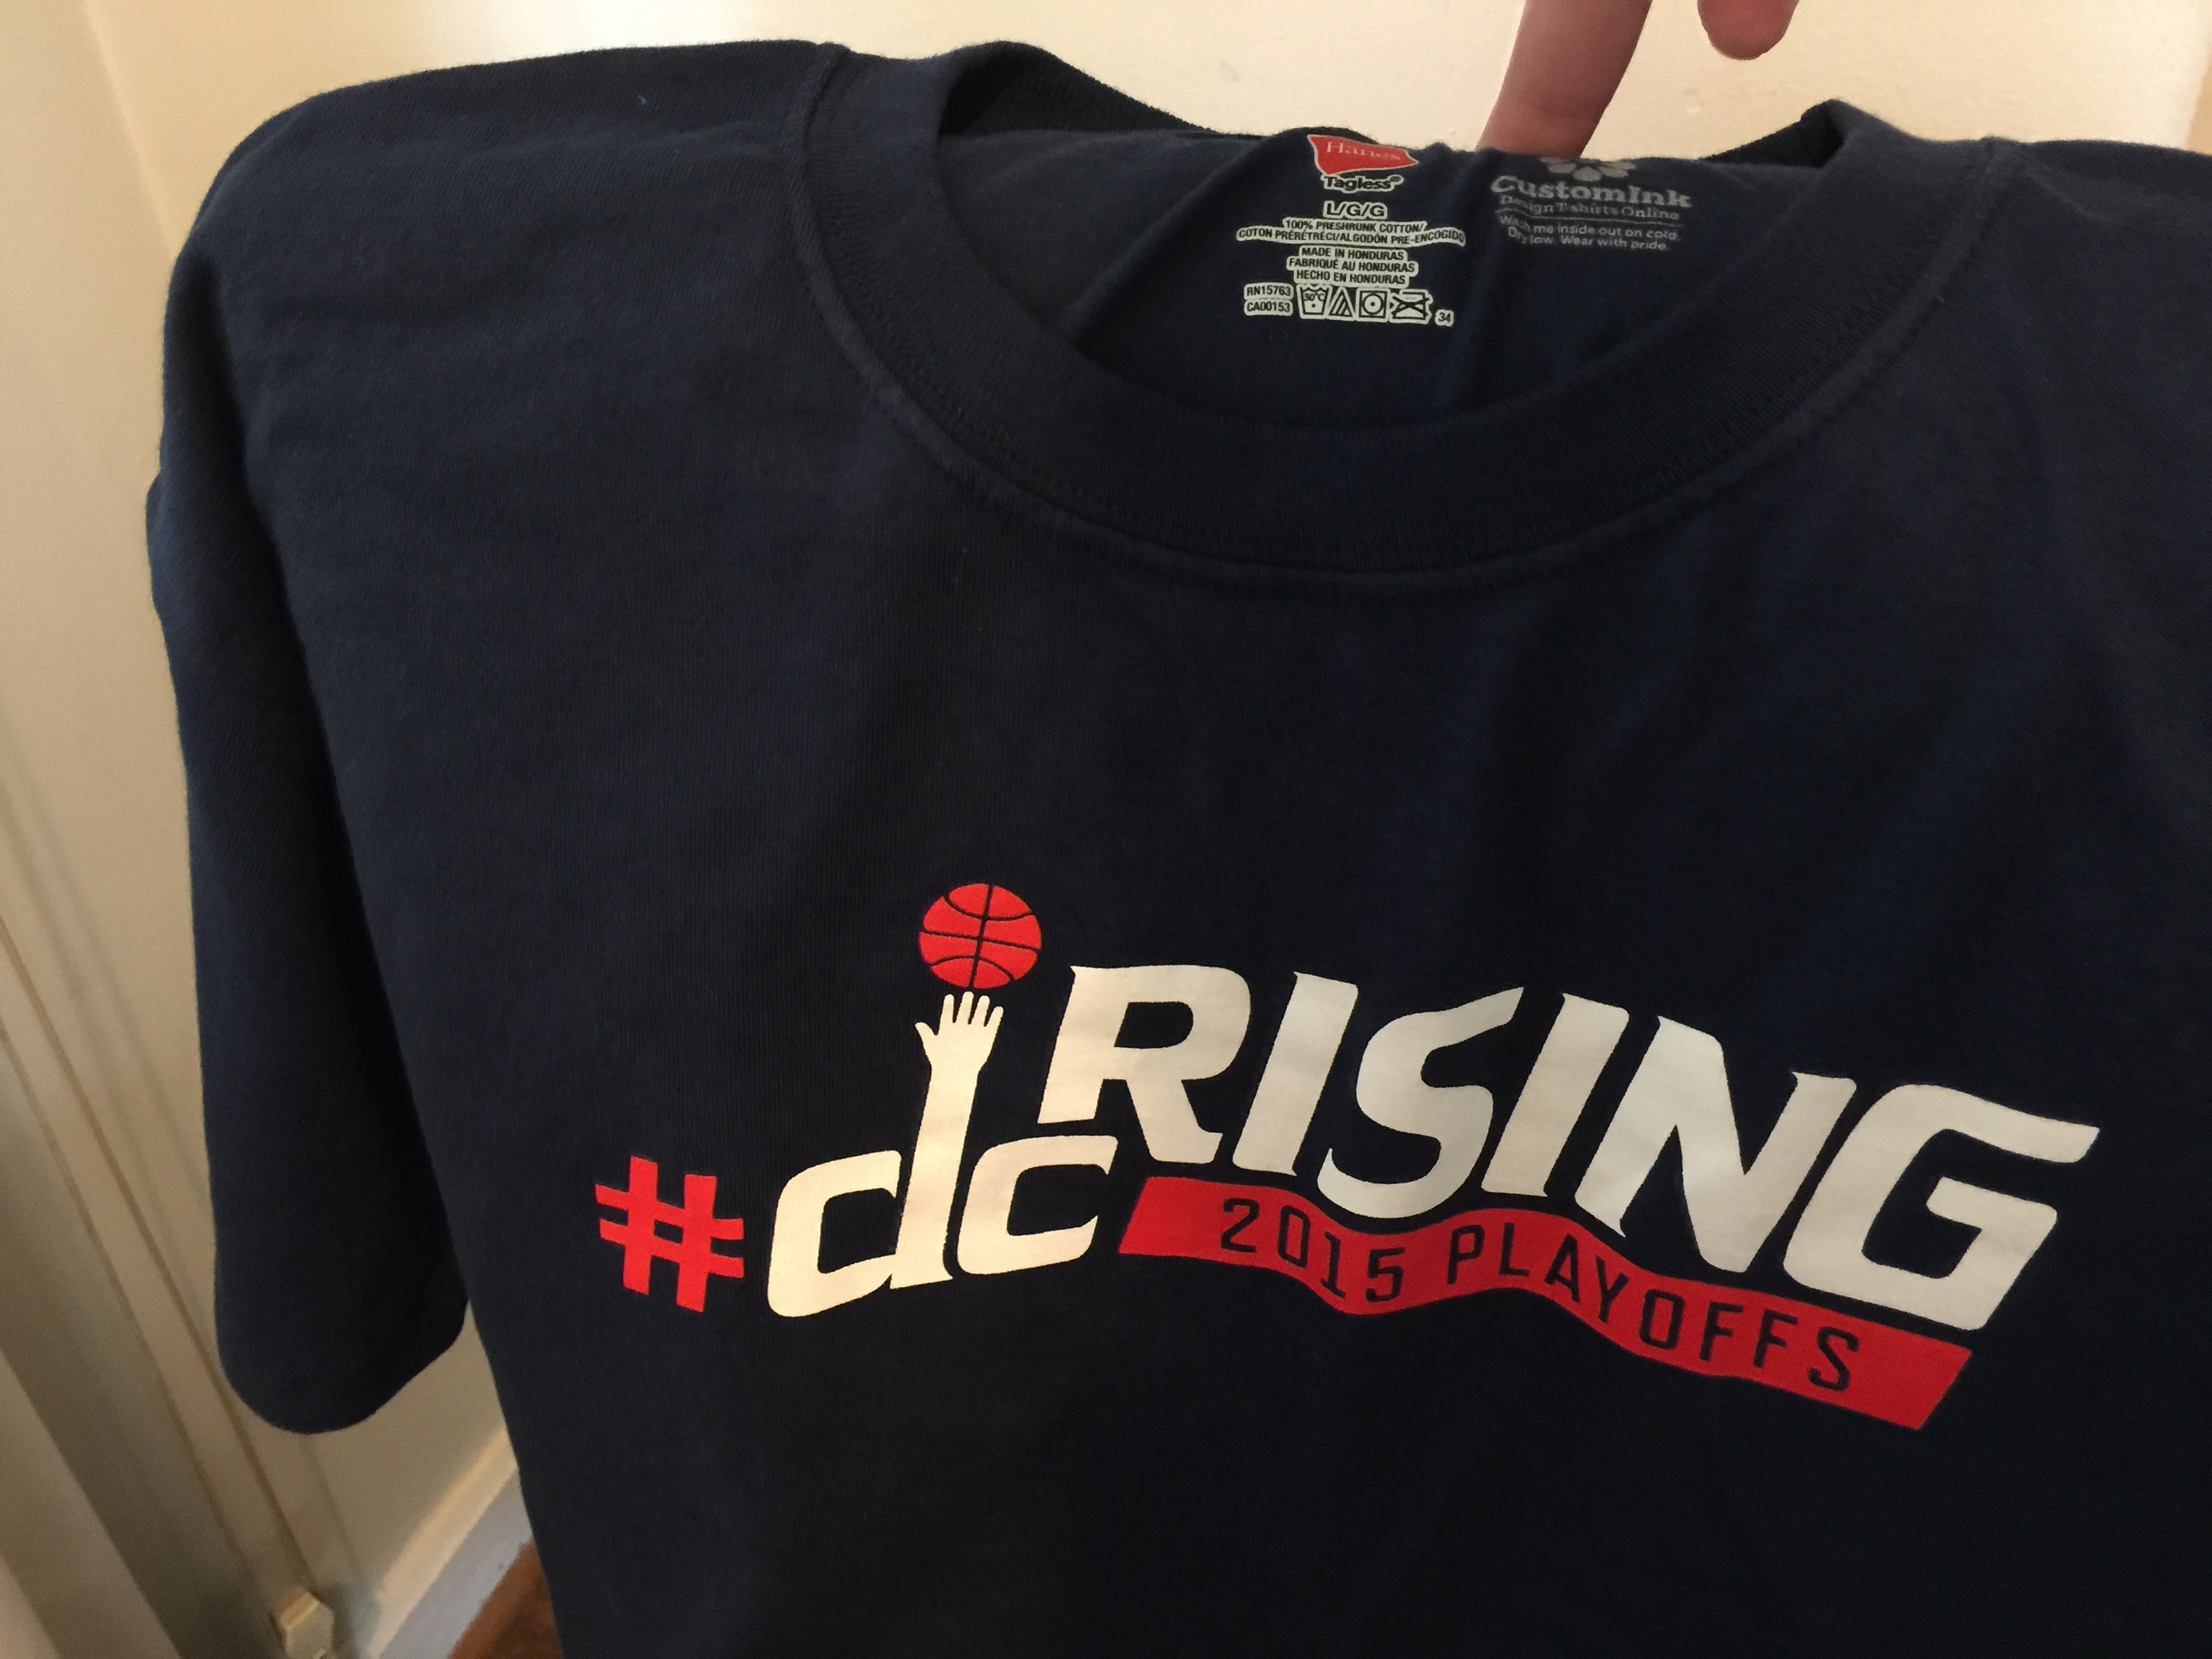 Wizards fans to get free shirts for Friday’s playoff game